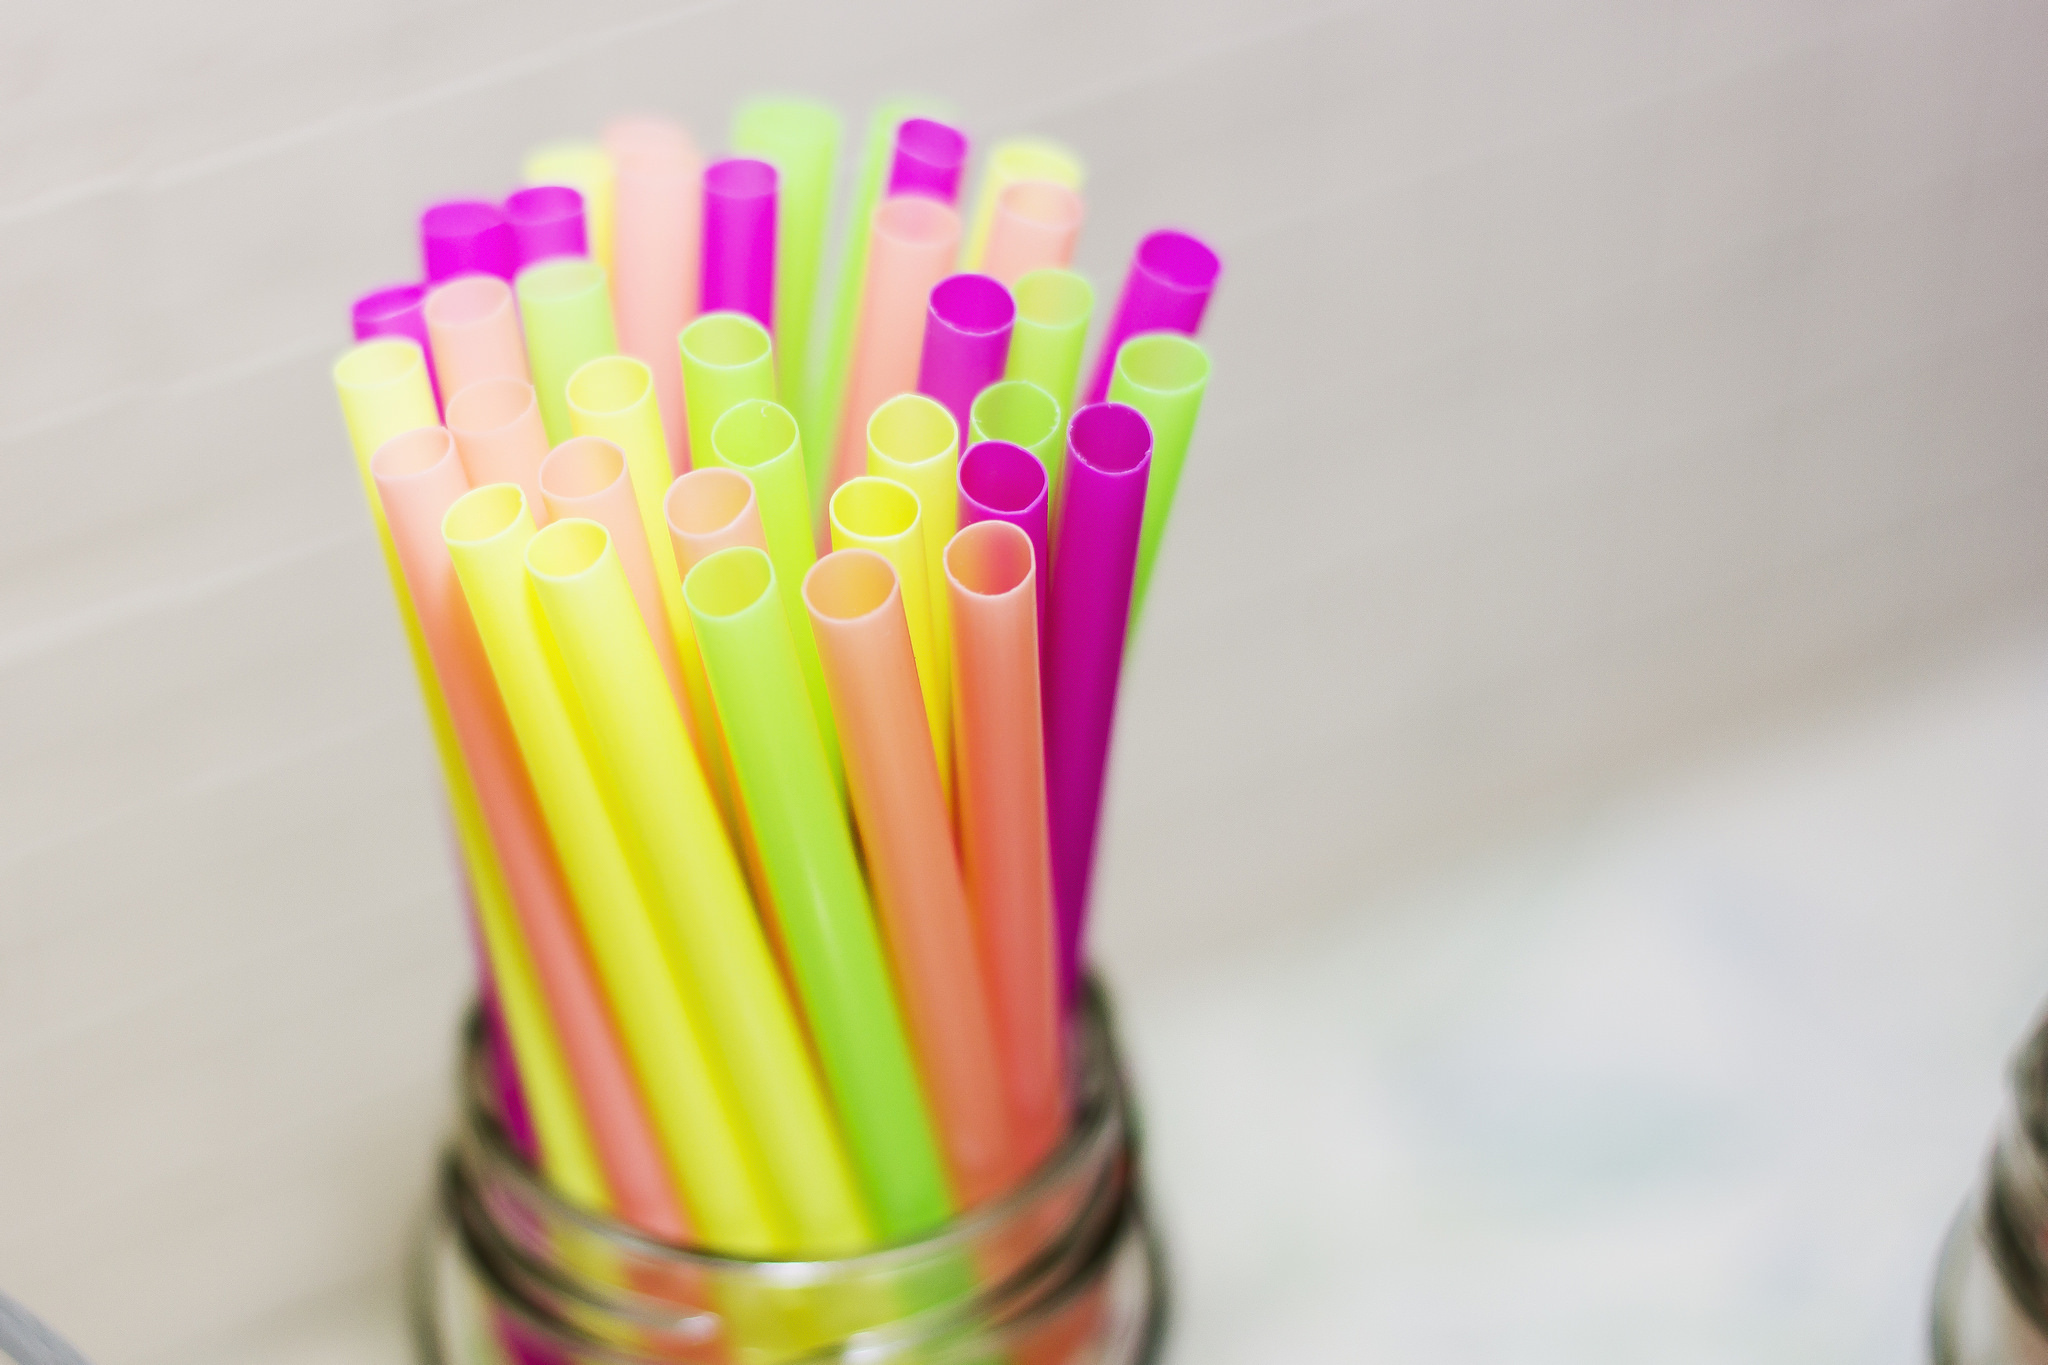 photography, colors, close up, straw UHD